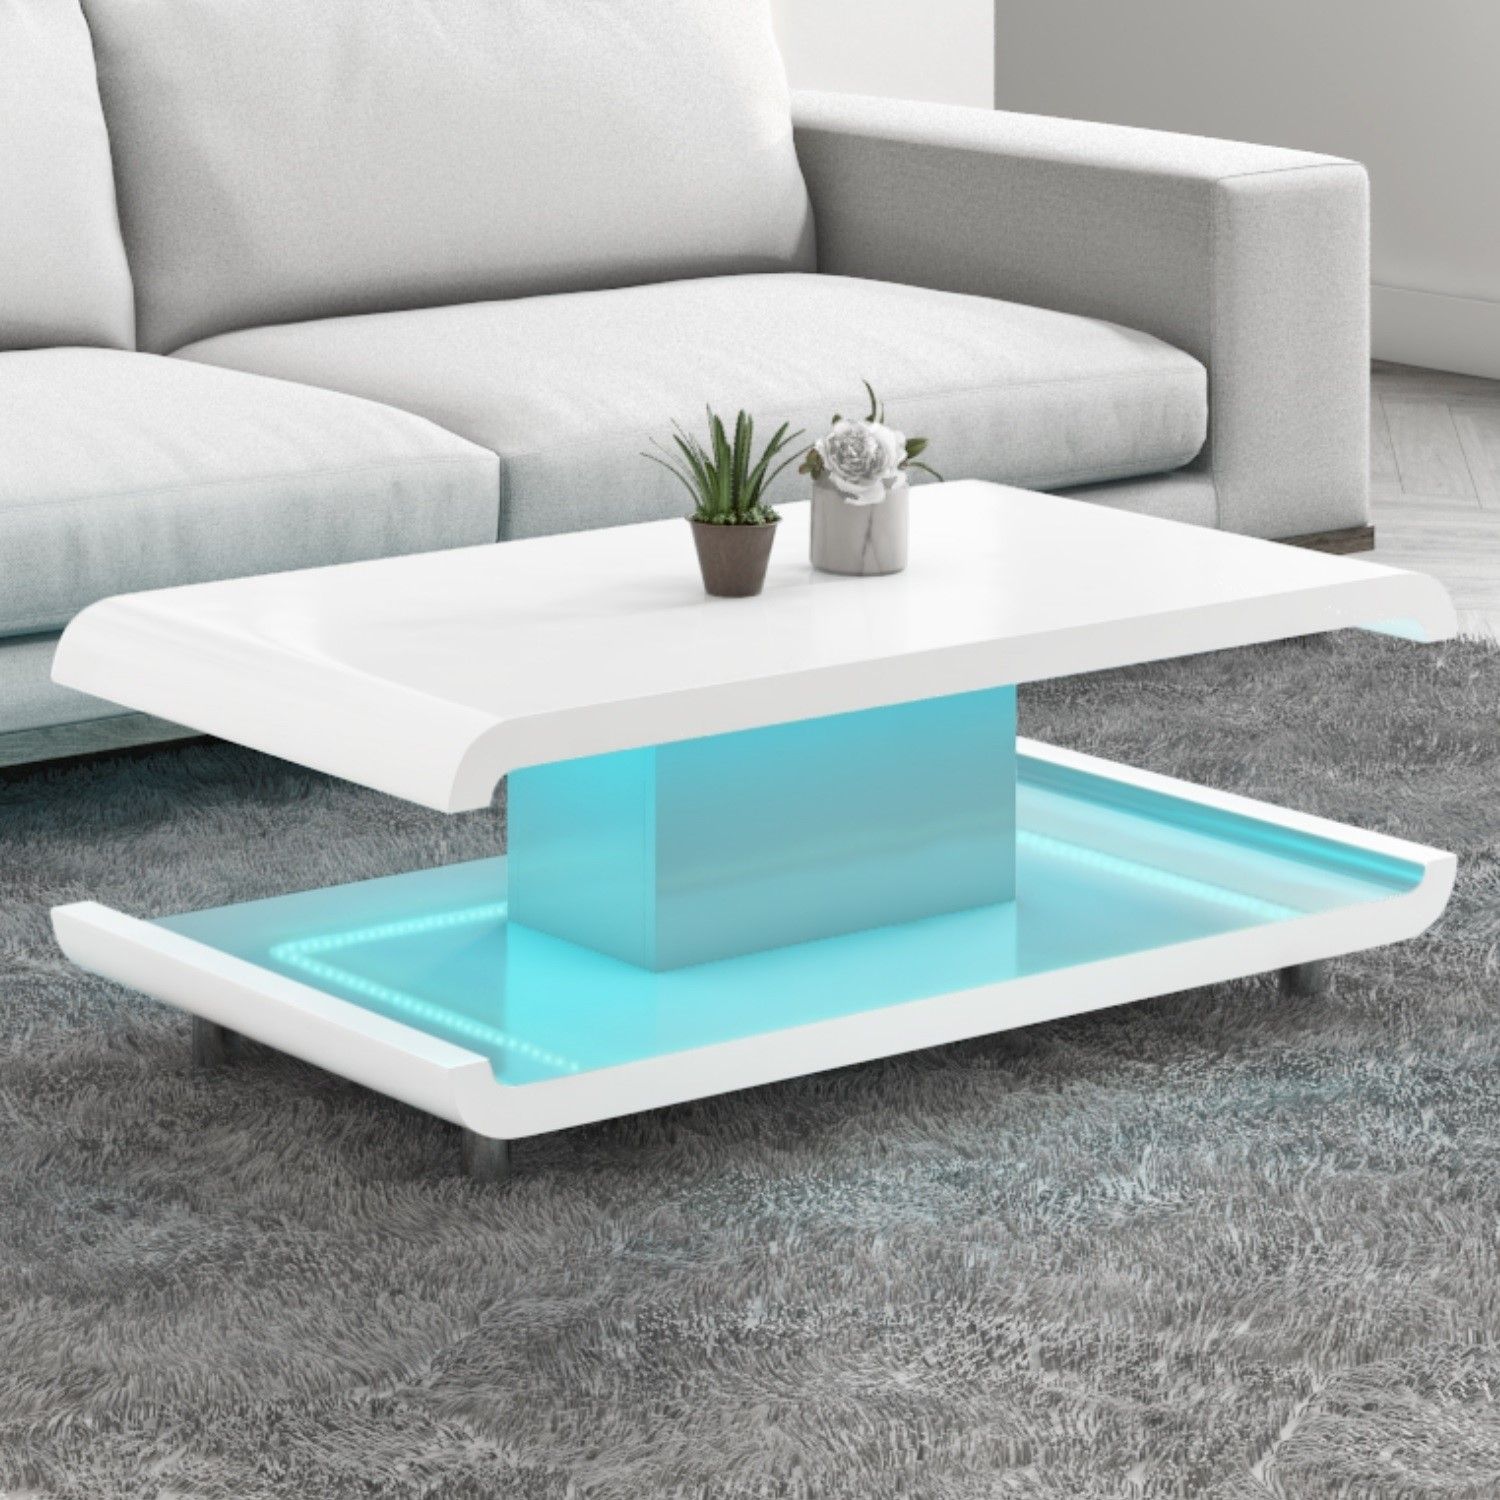 White Coffee Table With Led Lights / High Gloss White Coffee Table With In Rectangular Led Coffee Tables (Gallery 7 of 20)